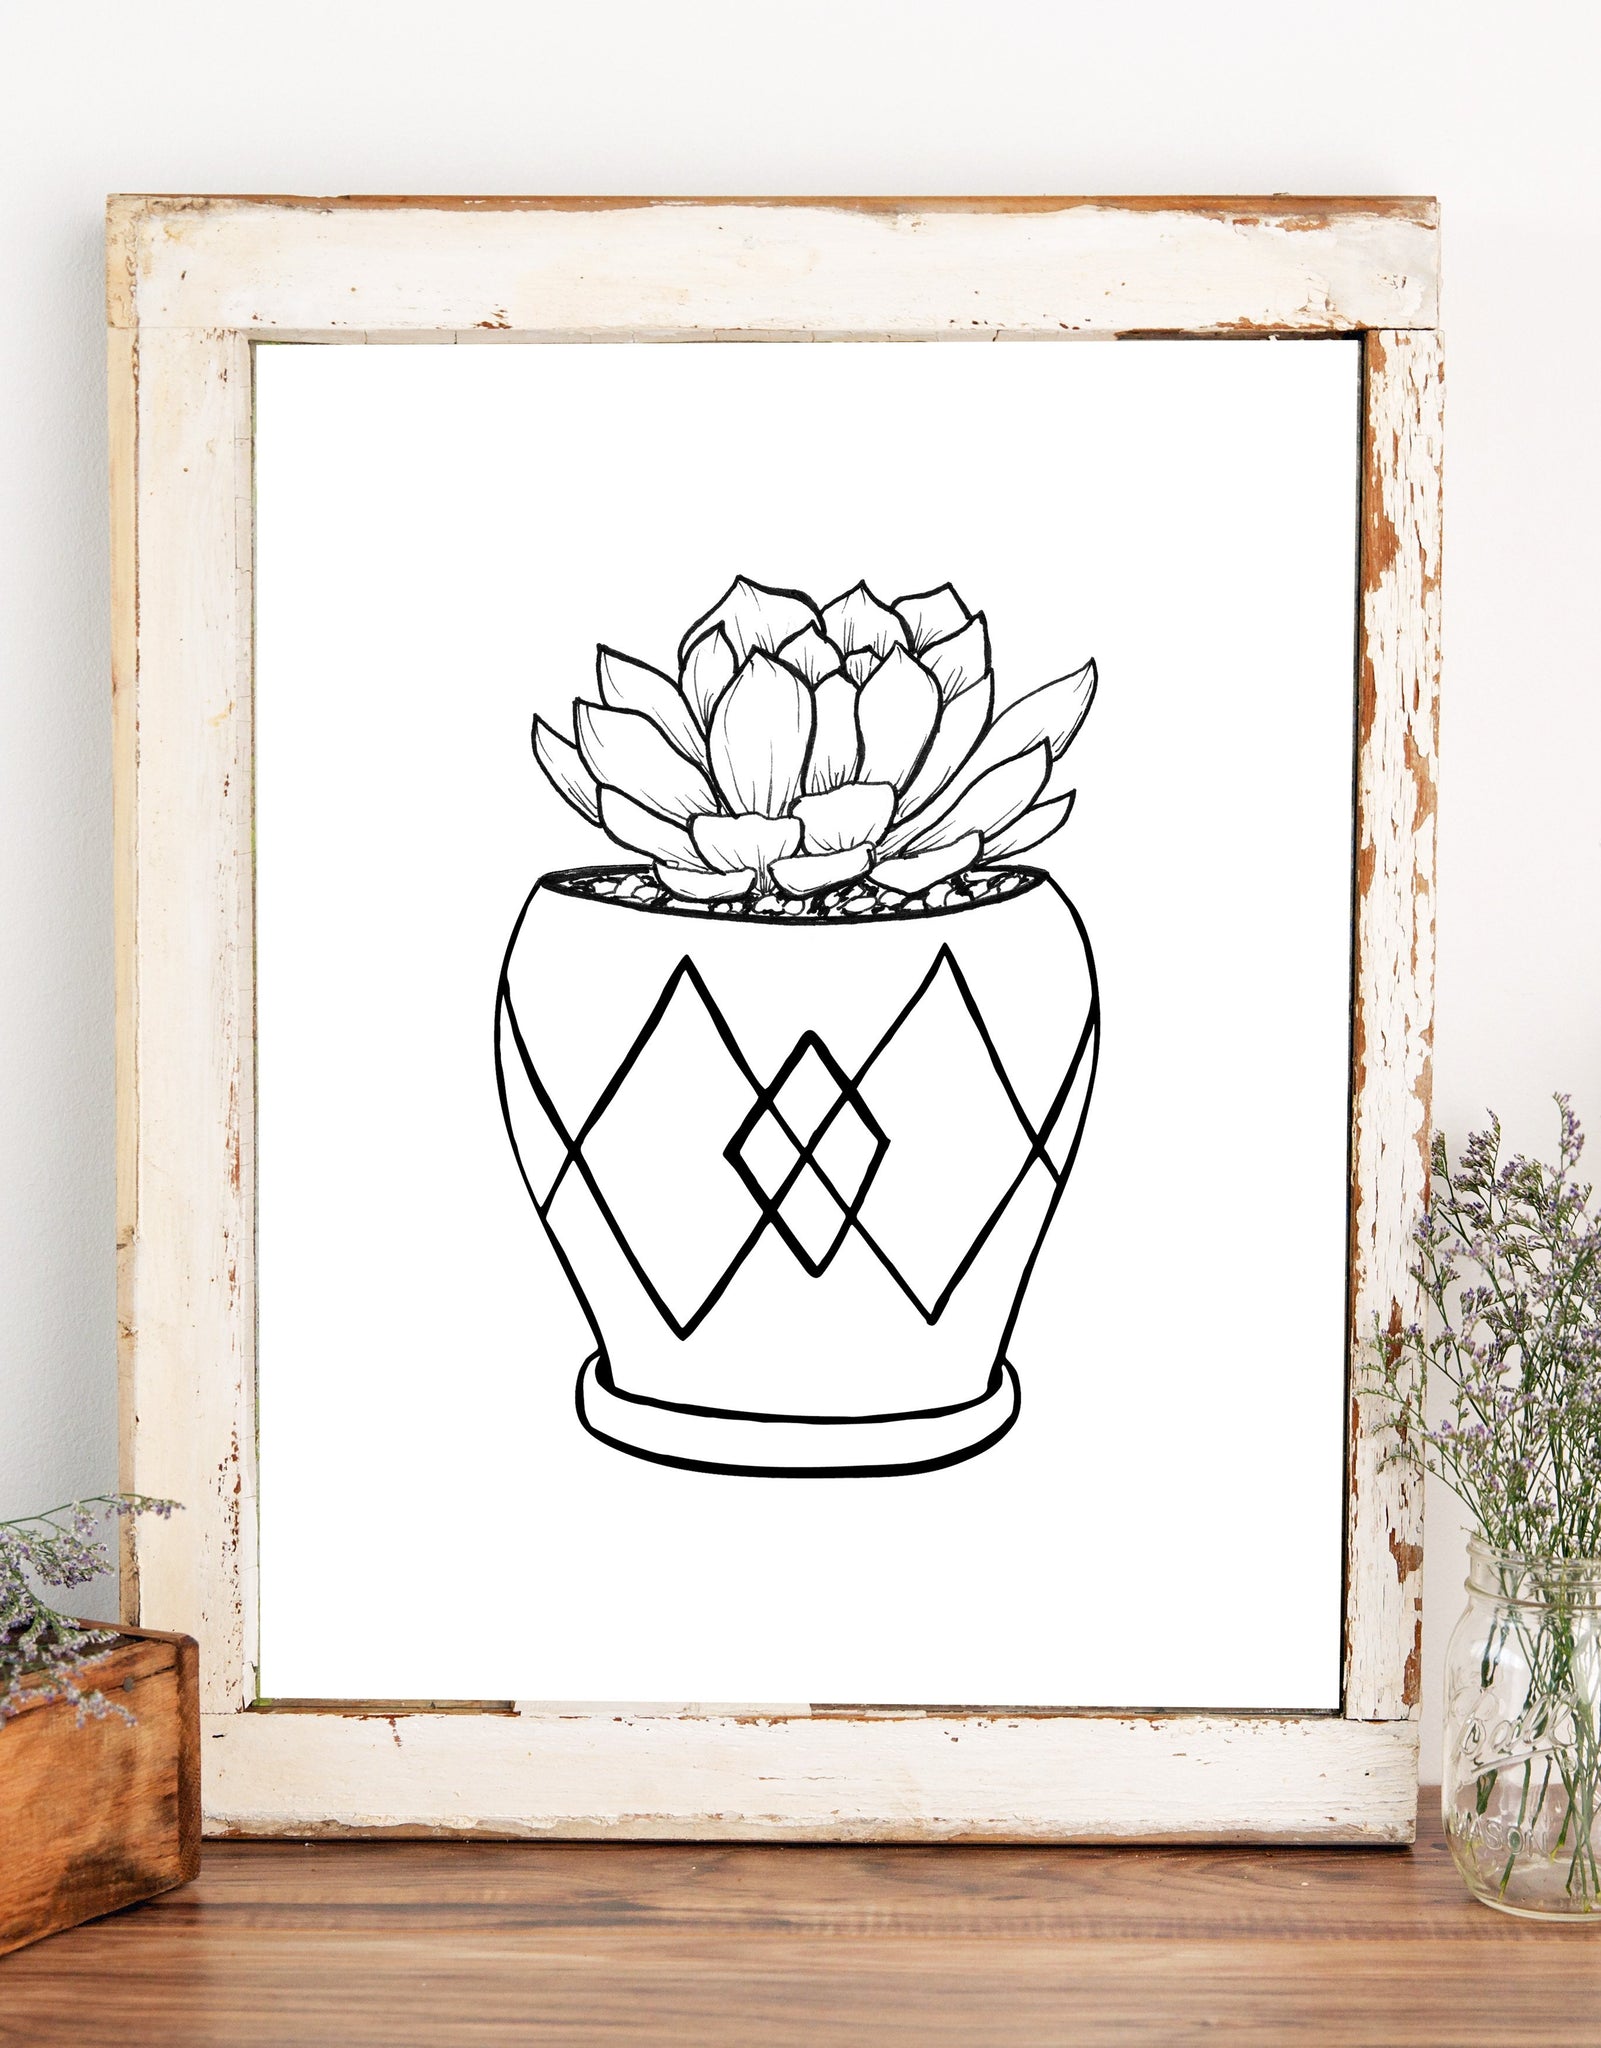 Wall art illustration of a hen and chick succulent in a mod style pot with diamond patterns in black and white shown in a wood frame with white chippy paint and a glass jar of flowers.